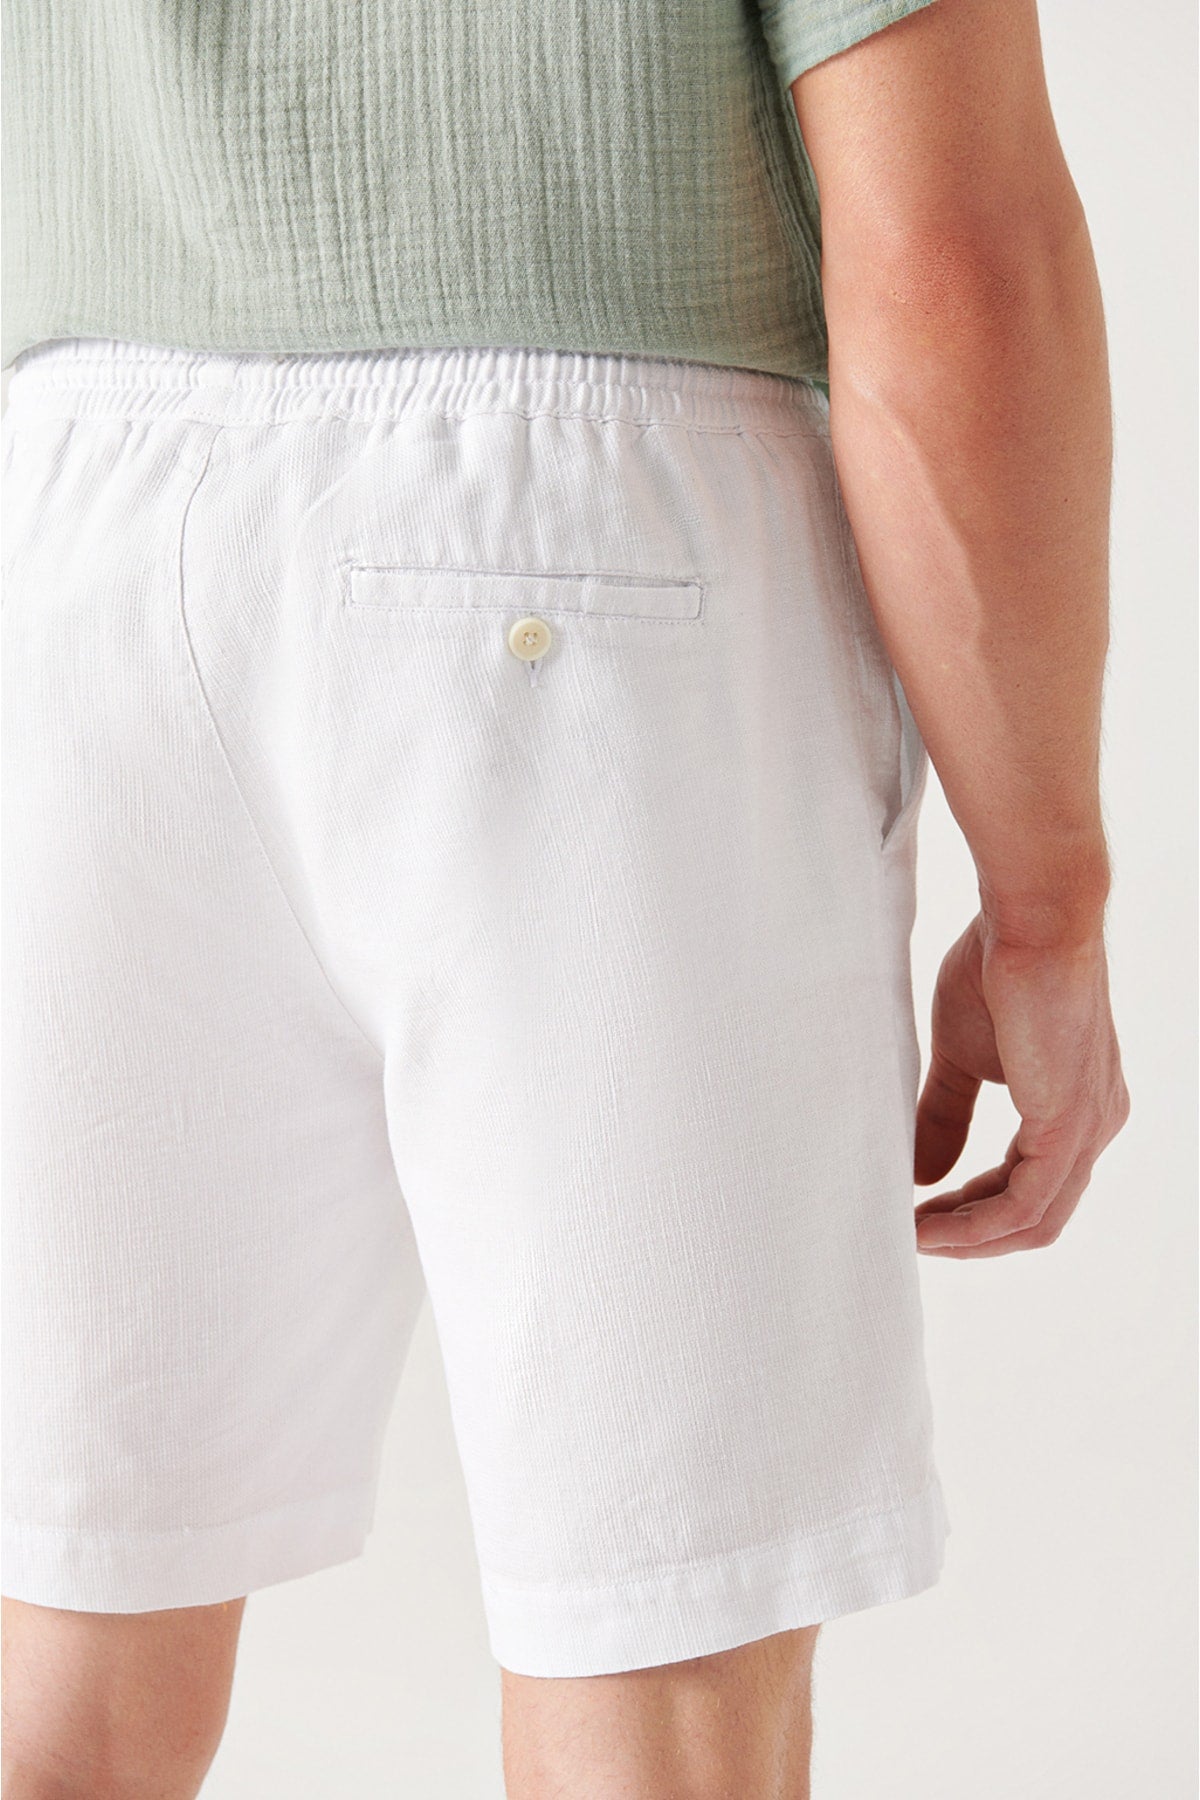 Men's white side pocket with waist tire cord Cardonian relaxed fit shorts E003603